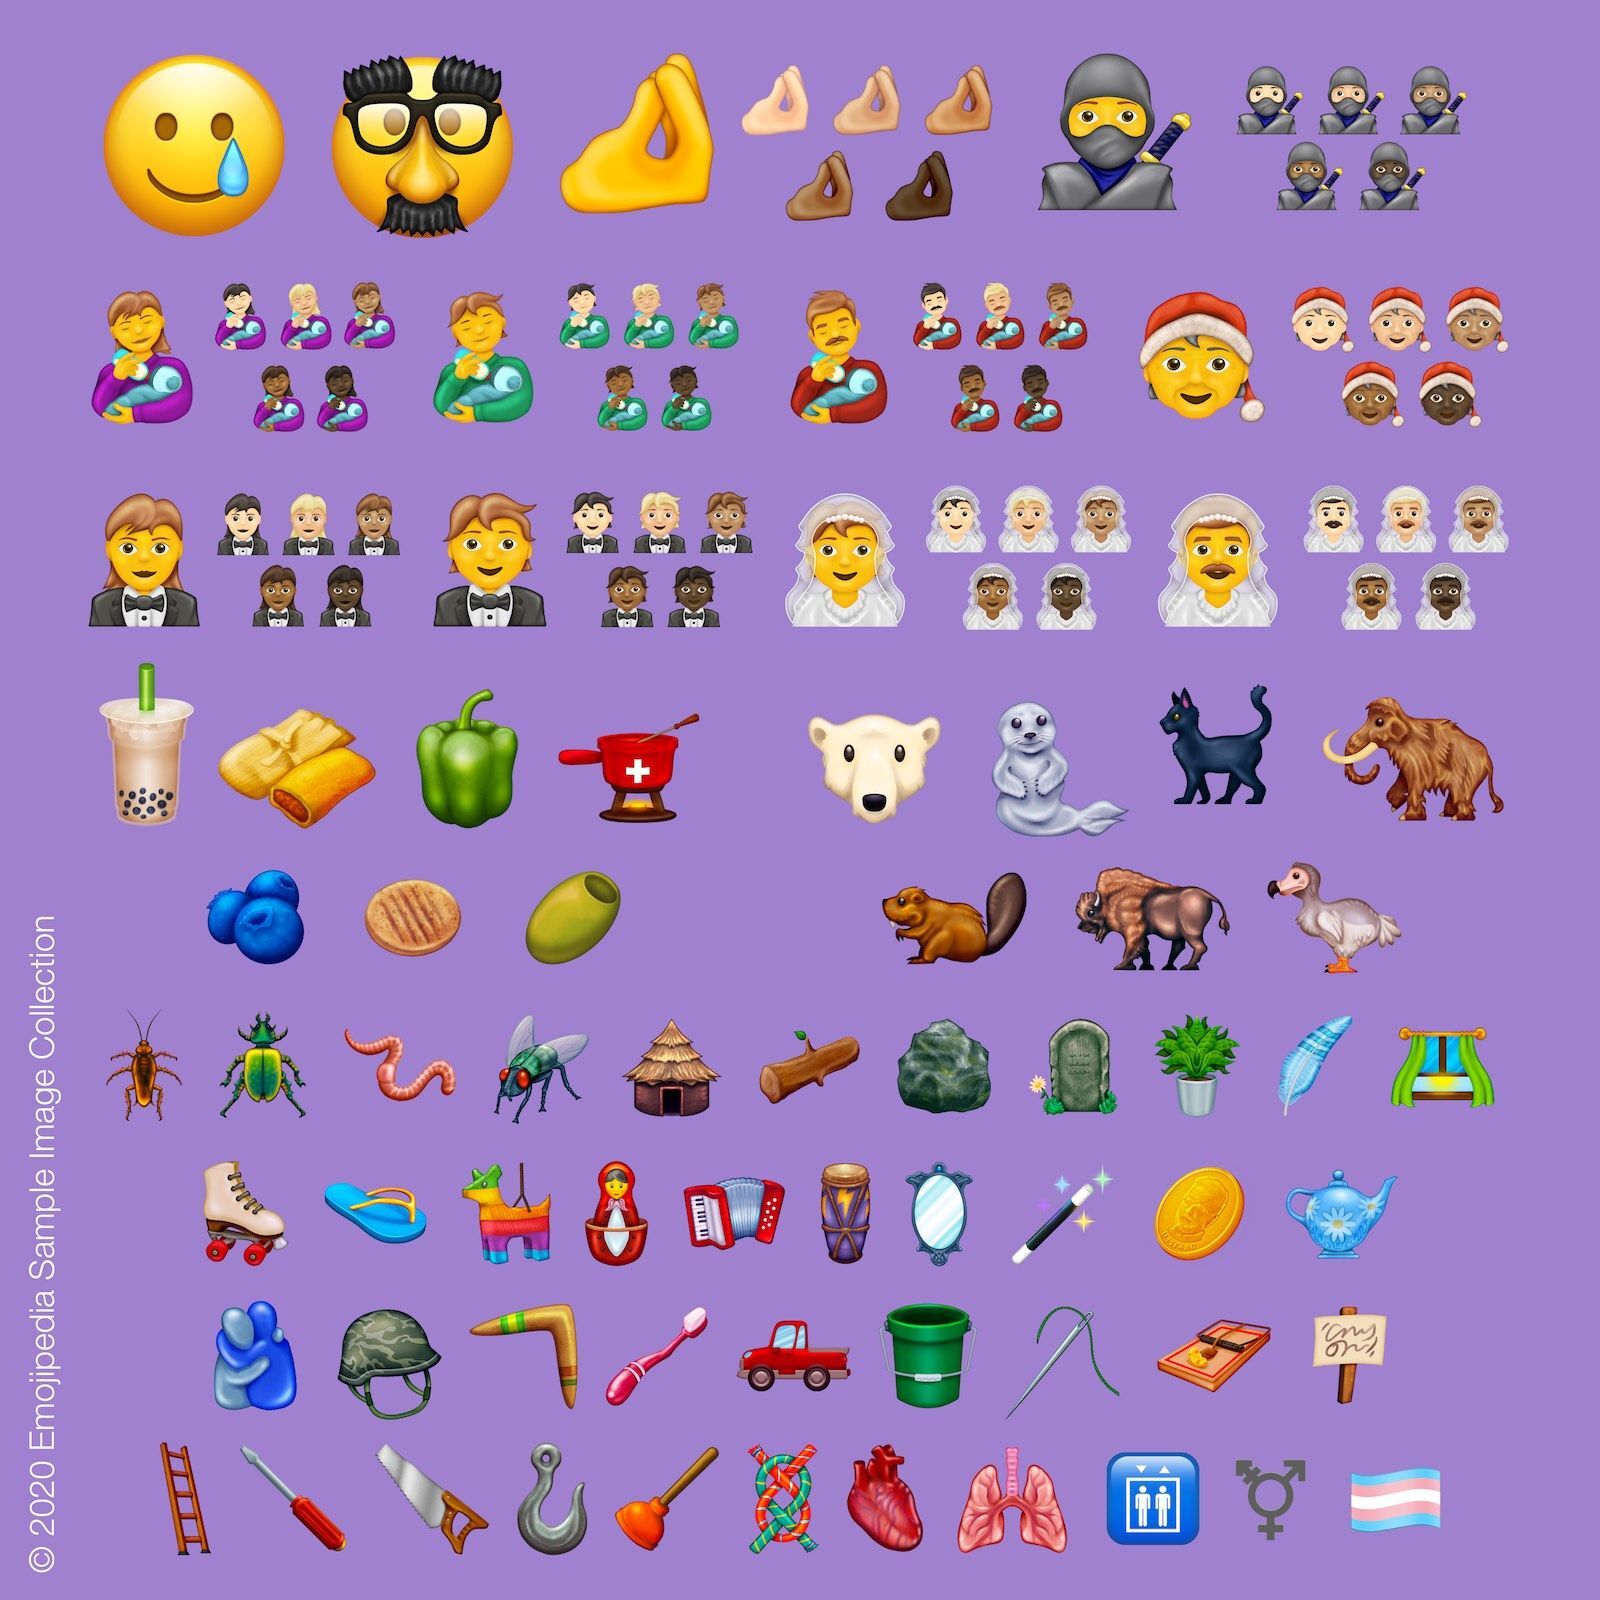 Introducing Emoji 13.0, coming to a mobile device near you as soon as this September - Take an early look at the 117 new emoji coming to your phone later this year